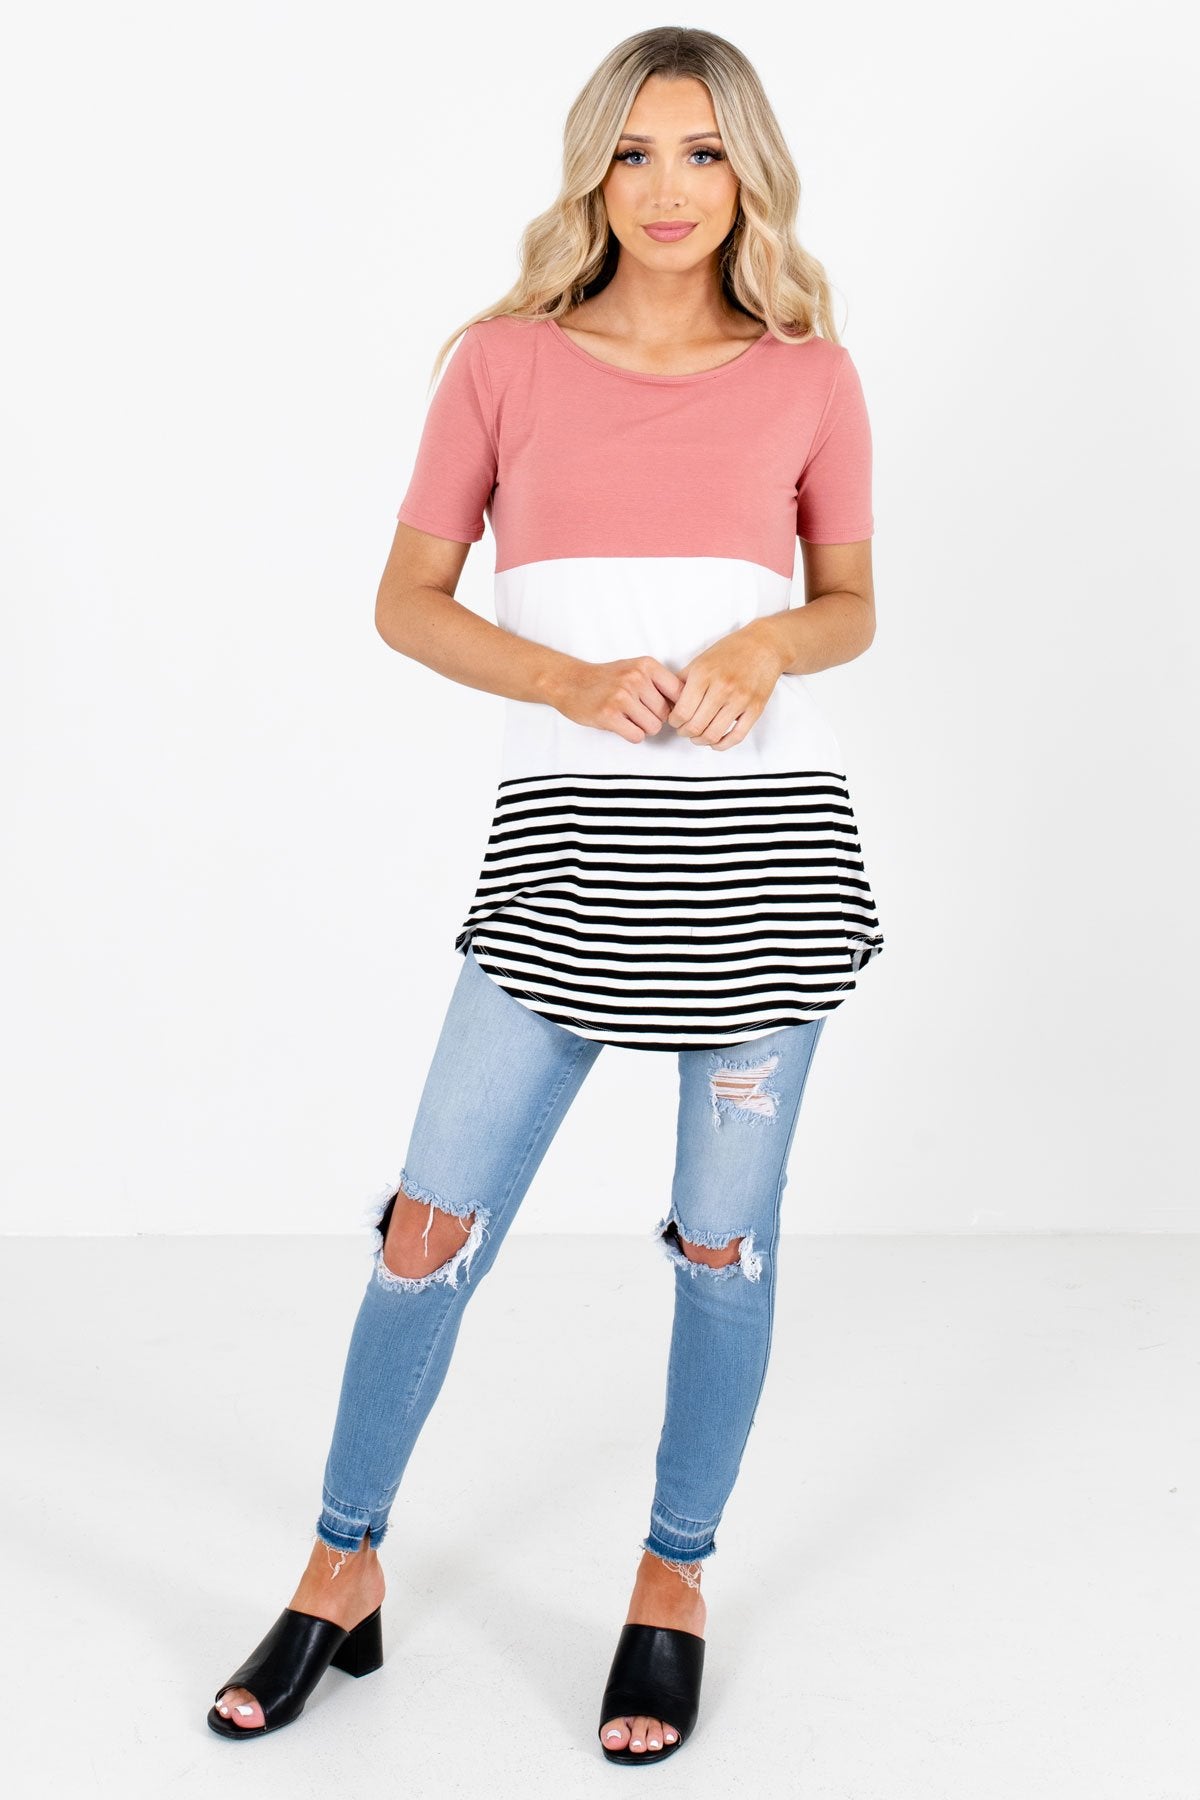 Women’s Pink Fall and Winter Boutique Clothing